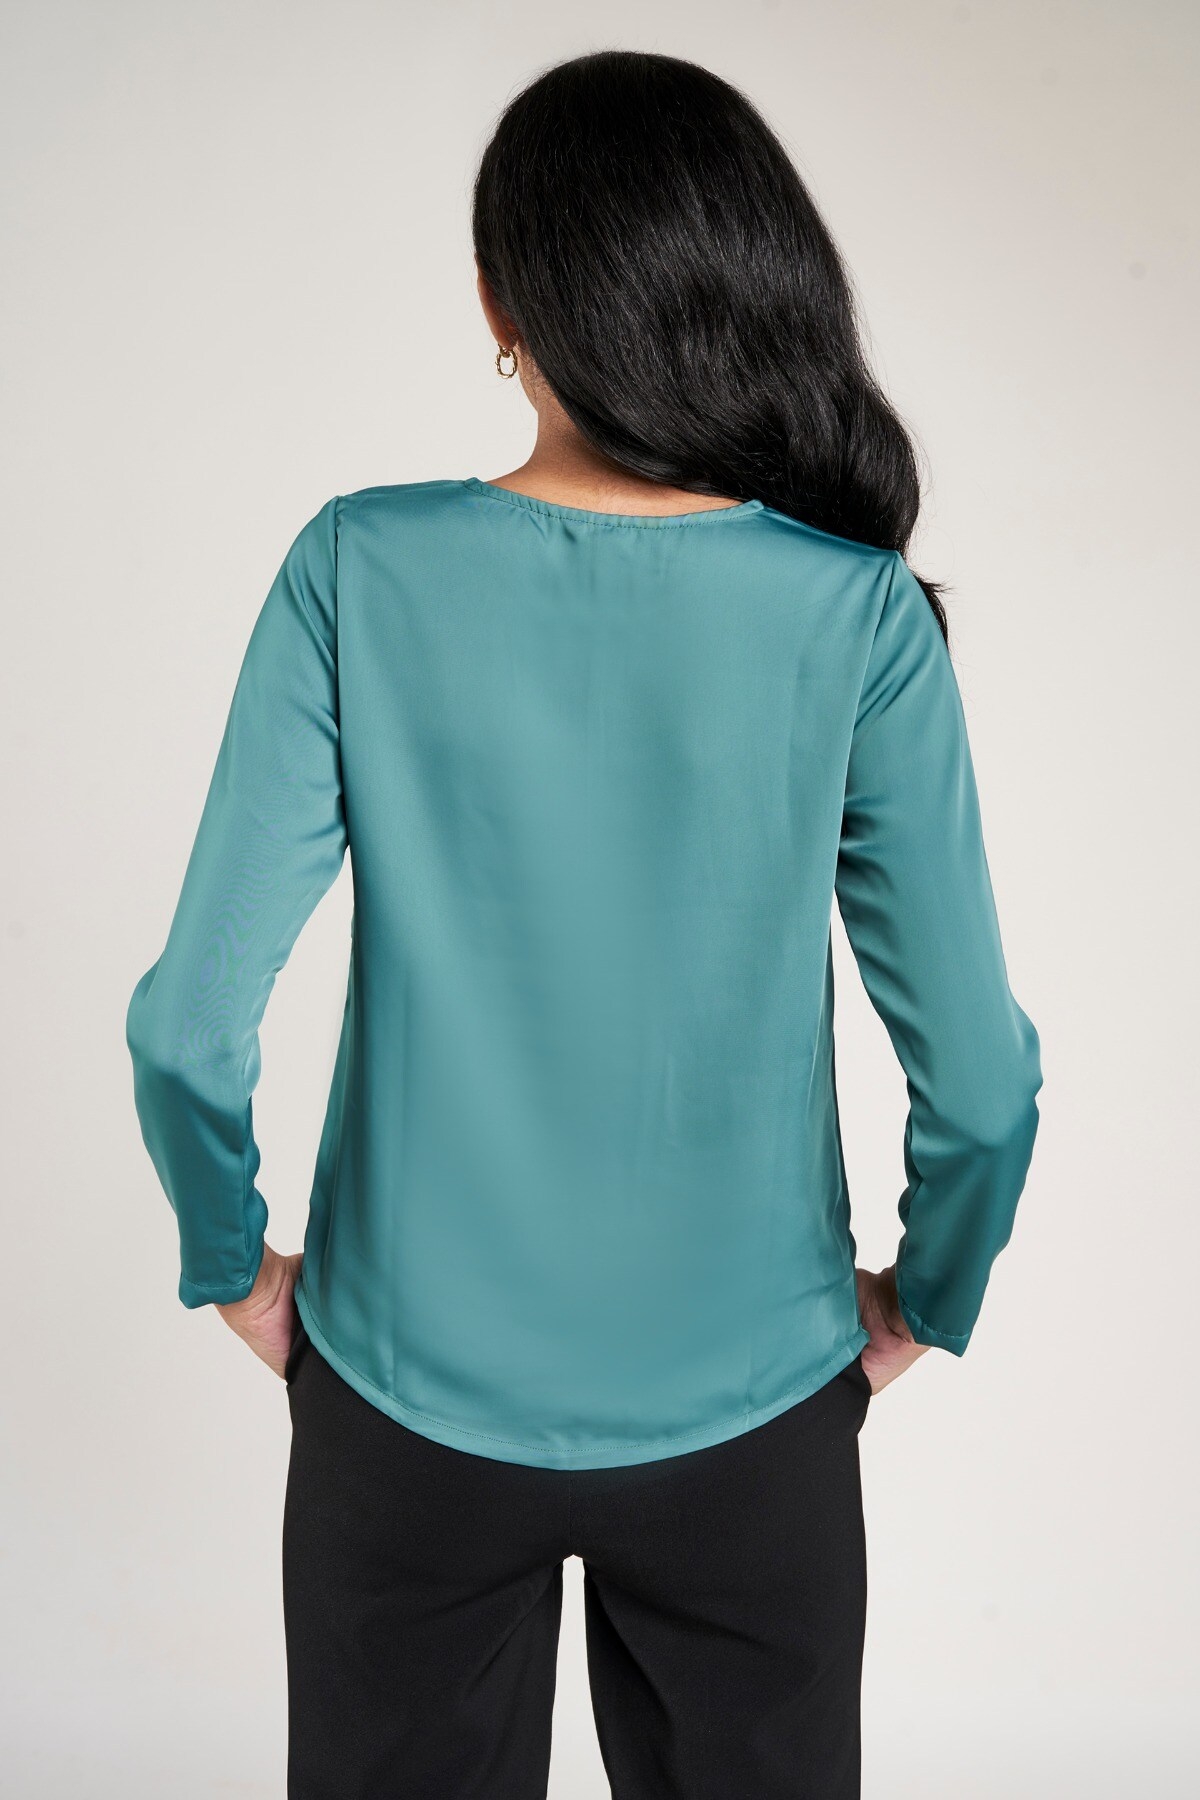 AND | AND TEAL TOP 0